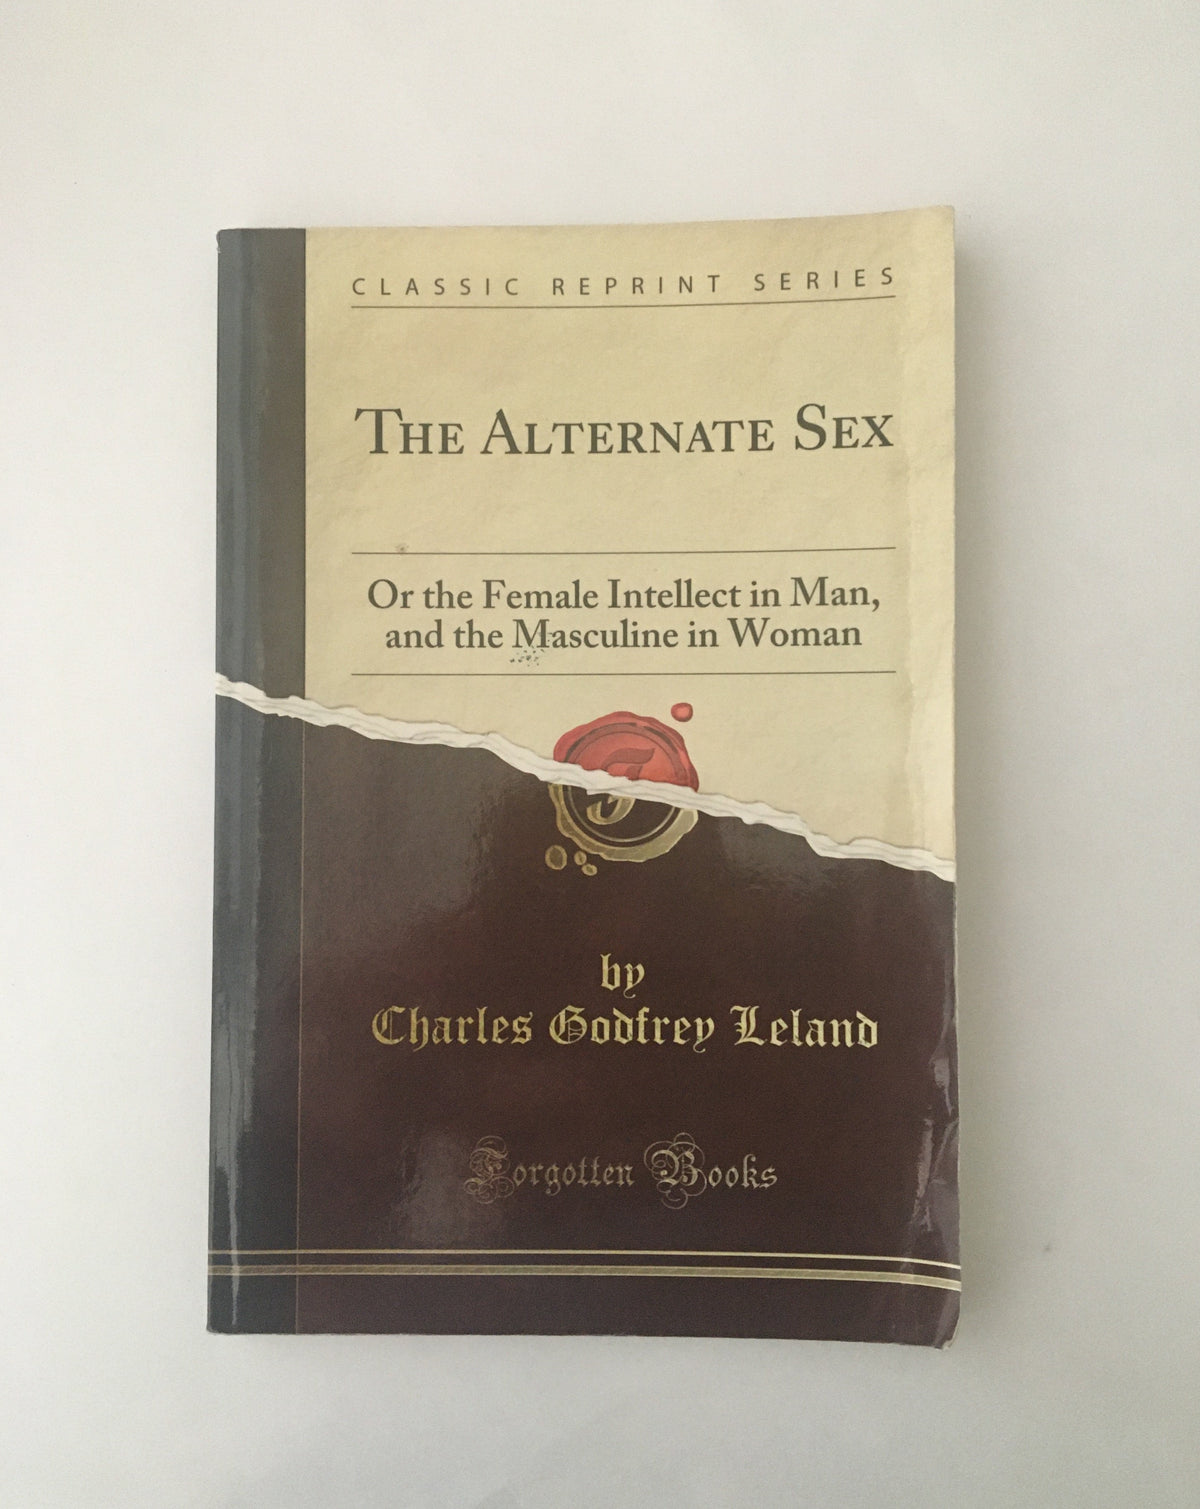 The Alternate Sex: or the female intellect in man, and the masculine in woman by Charles Godfrey Leland